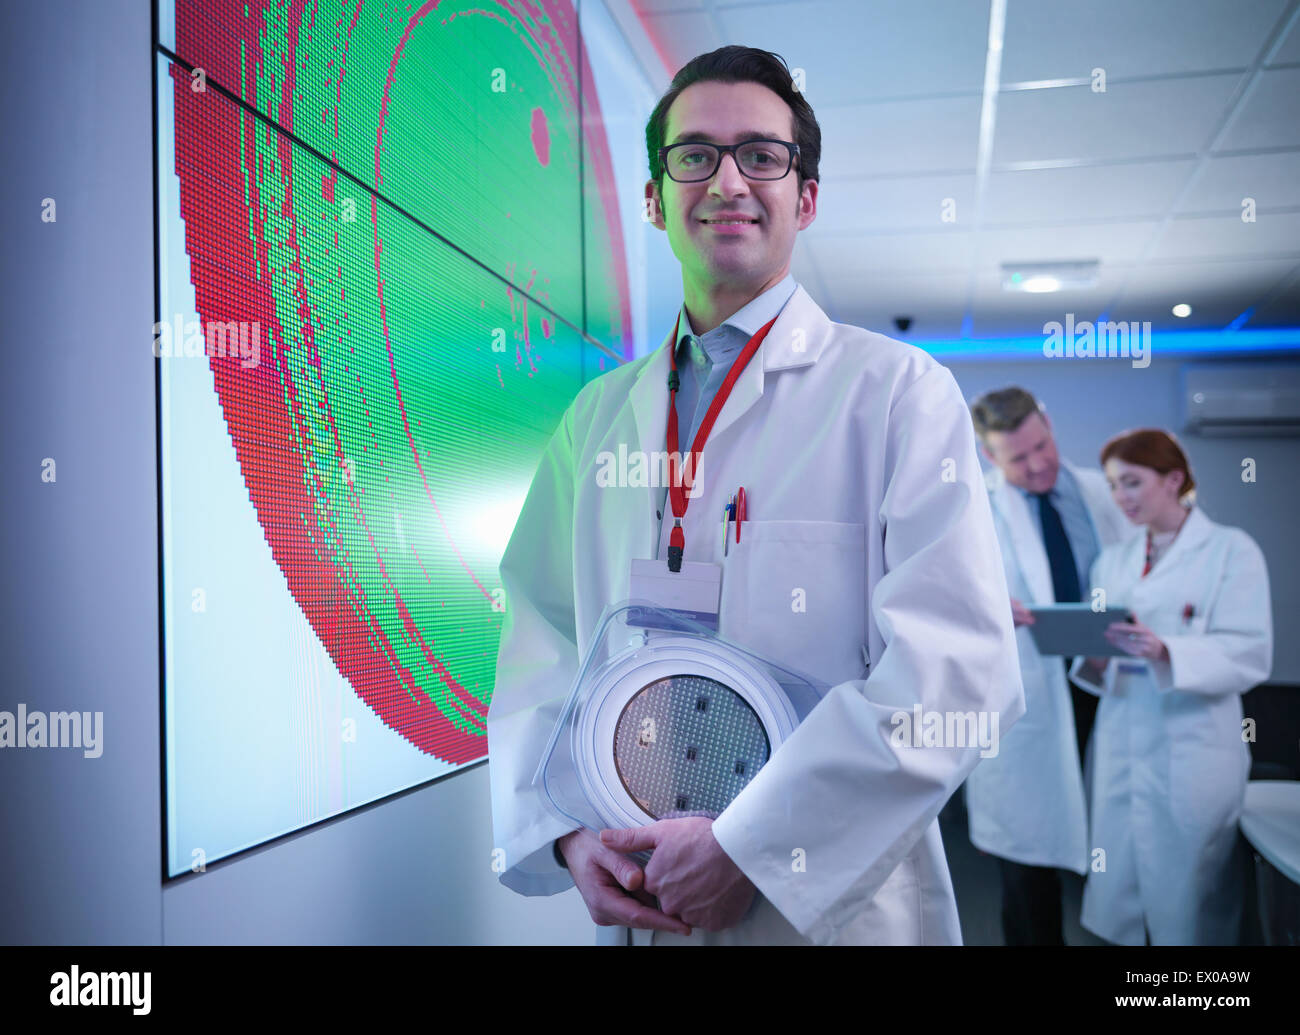 Portrait of scientist in front of graphical display of silicon wafer on screens Stock Photo